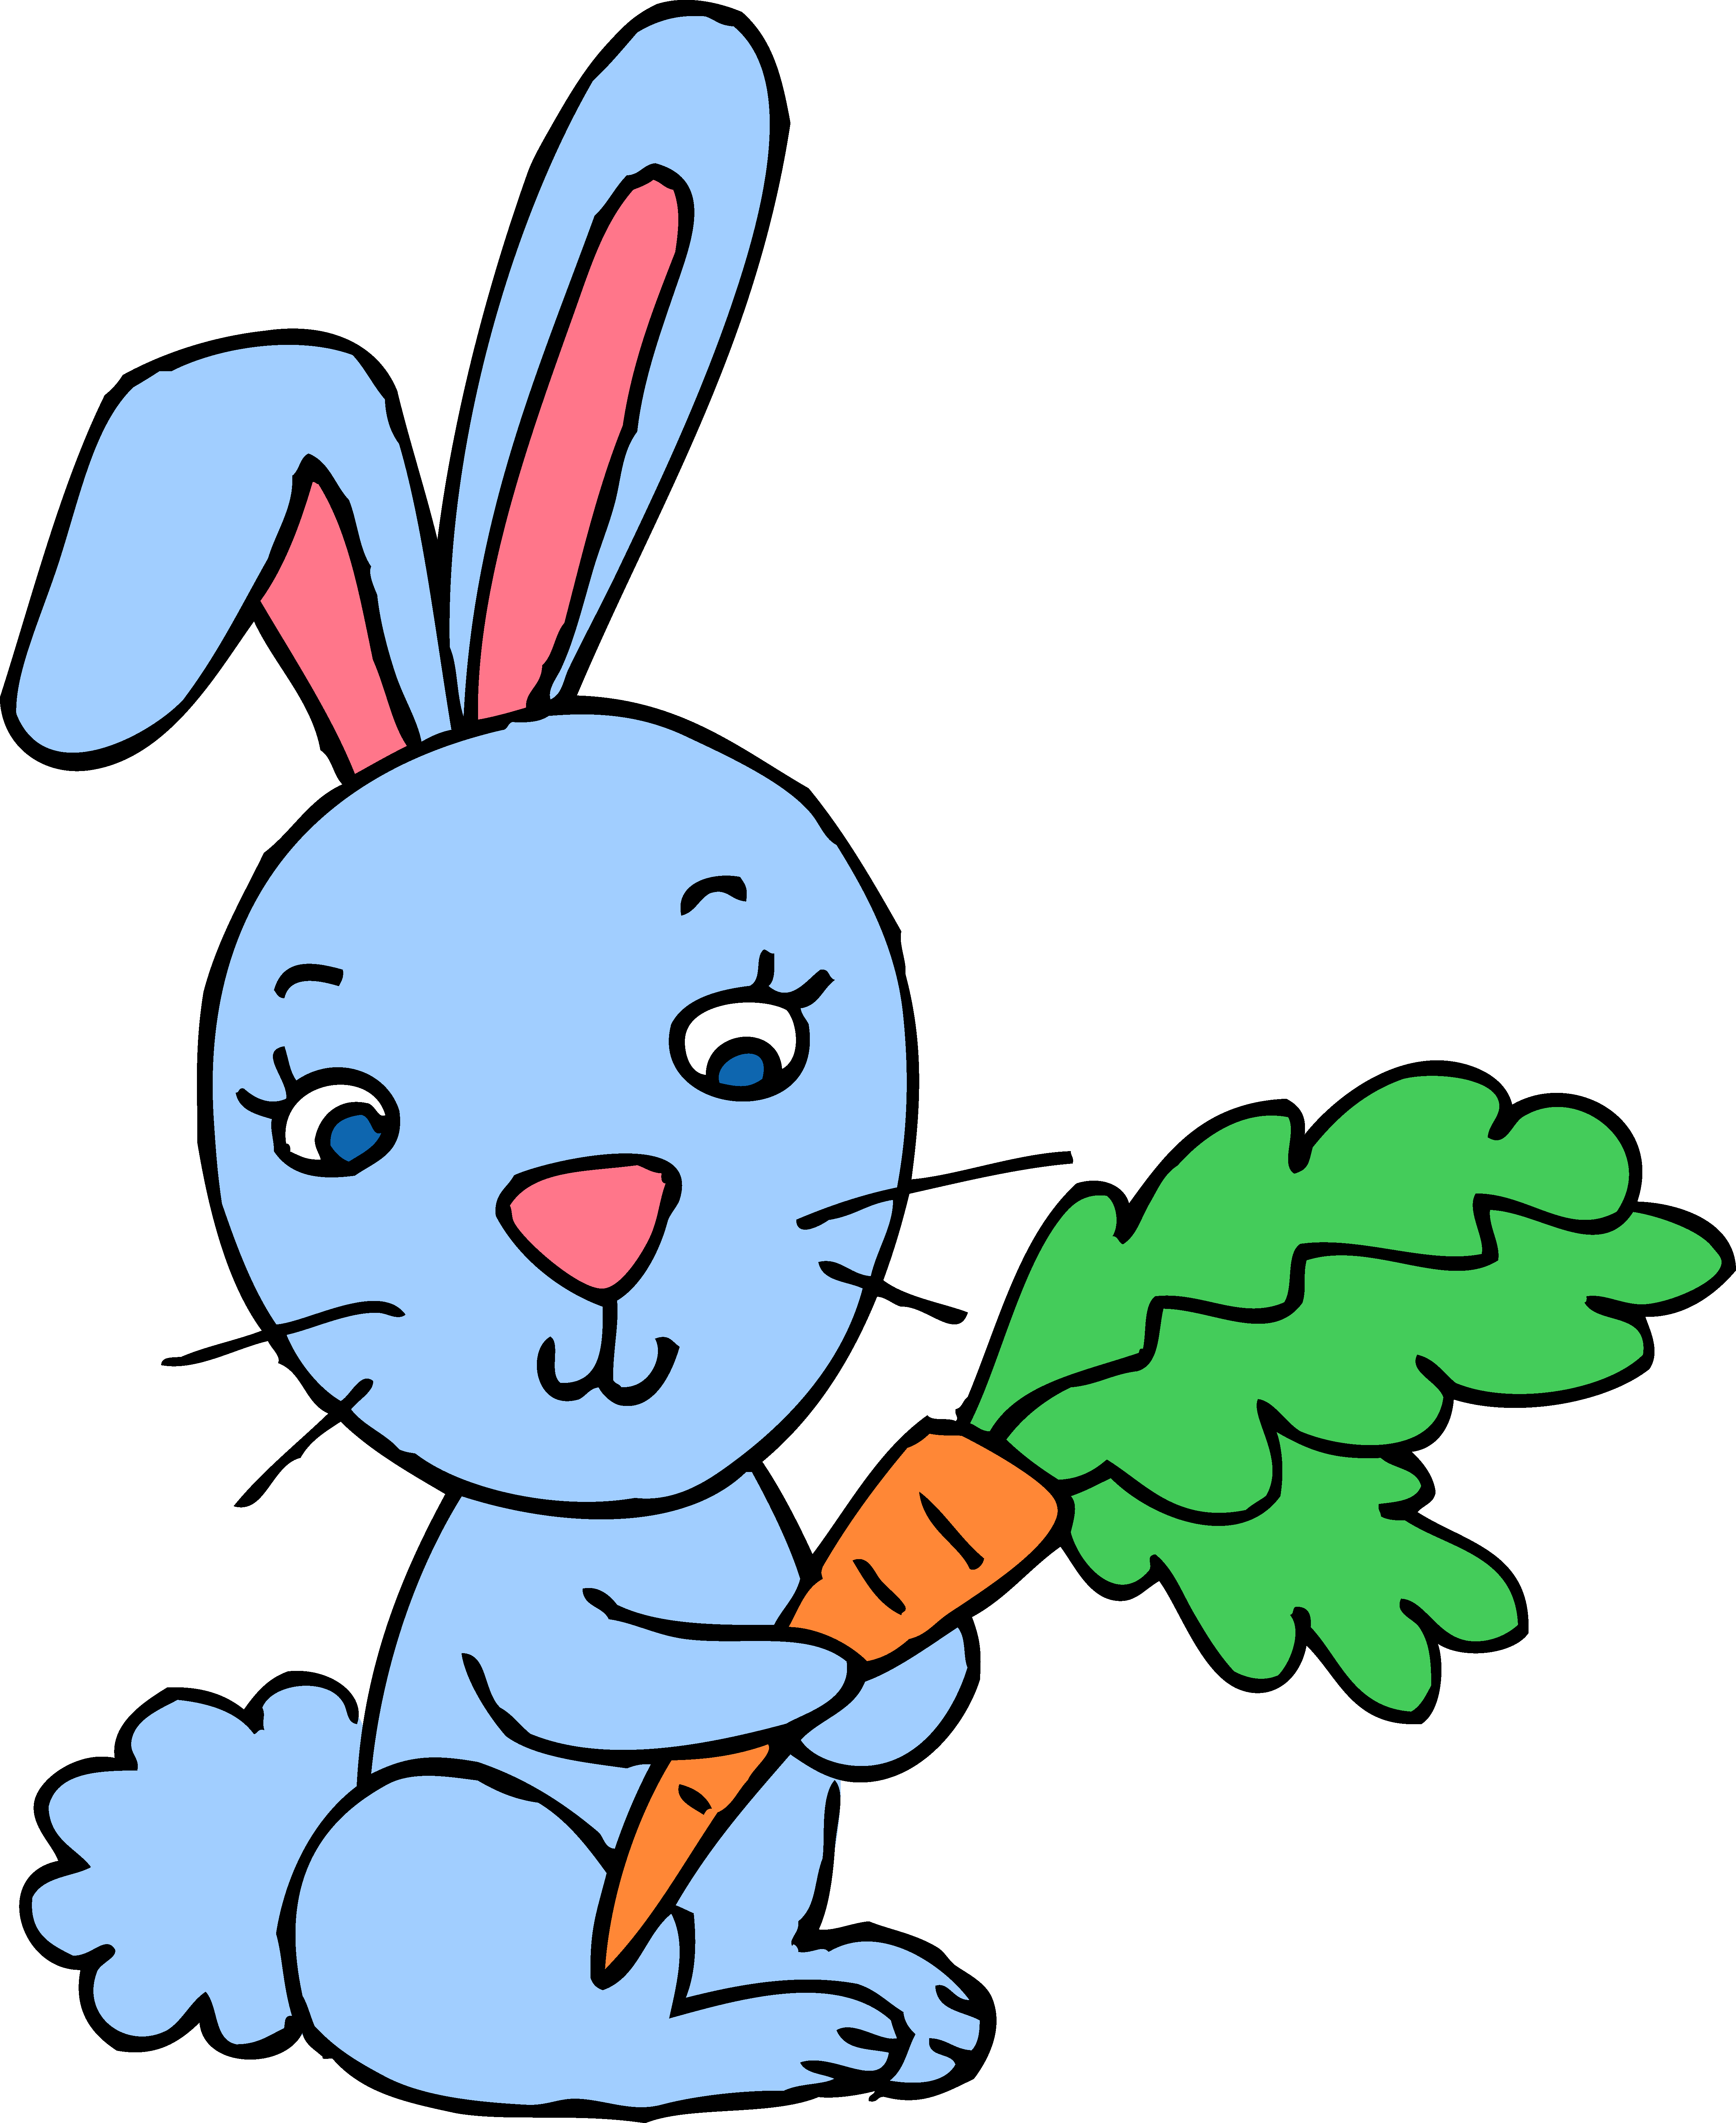 Clipart easter spring. Bunny at getdrawings com